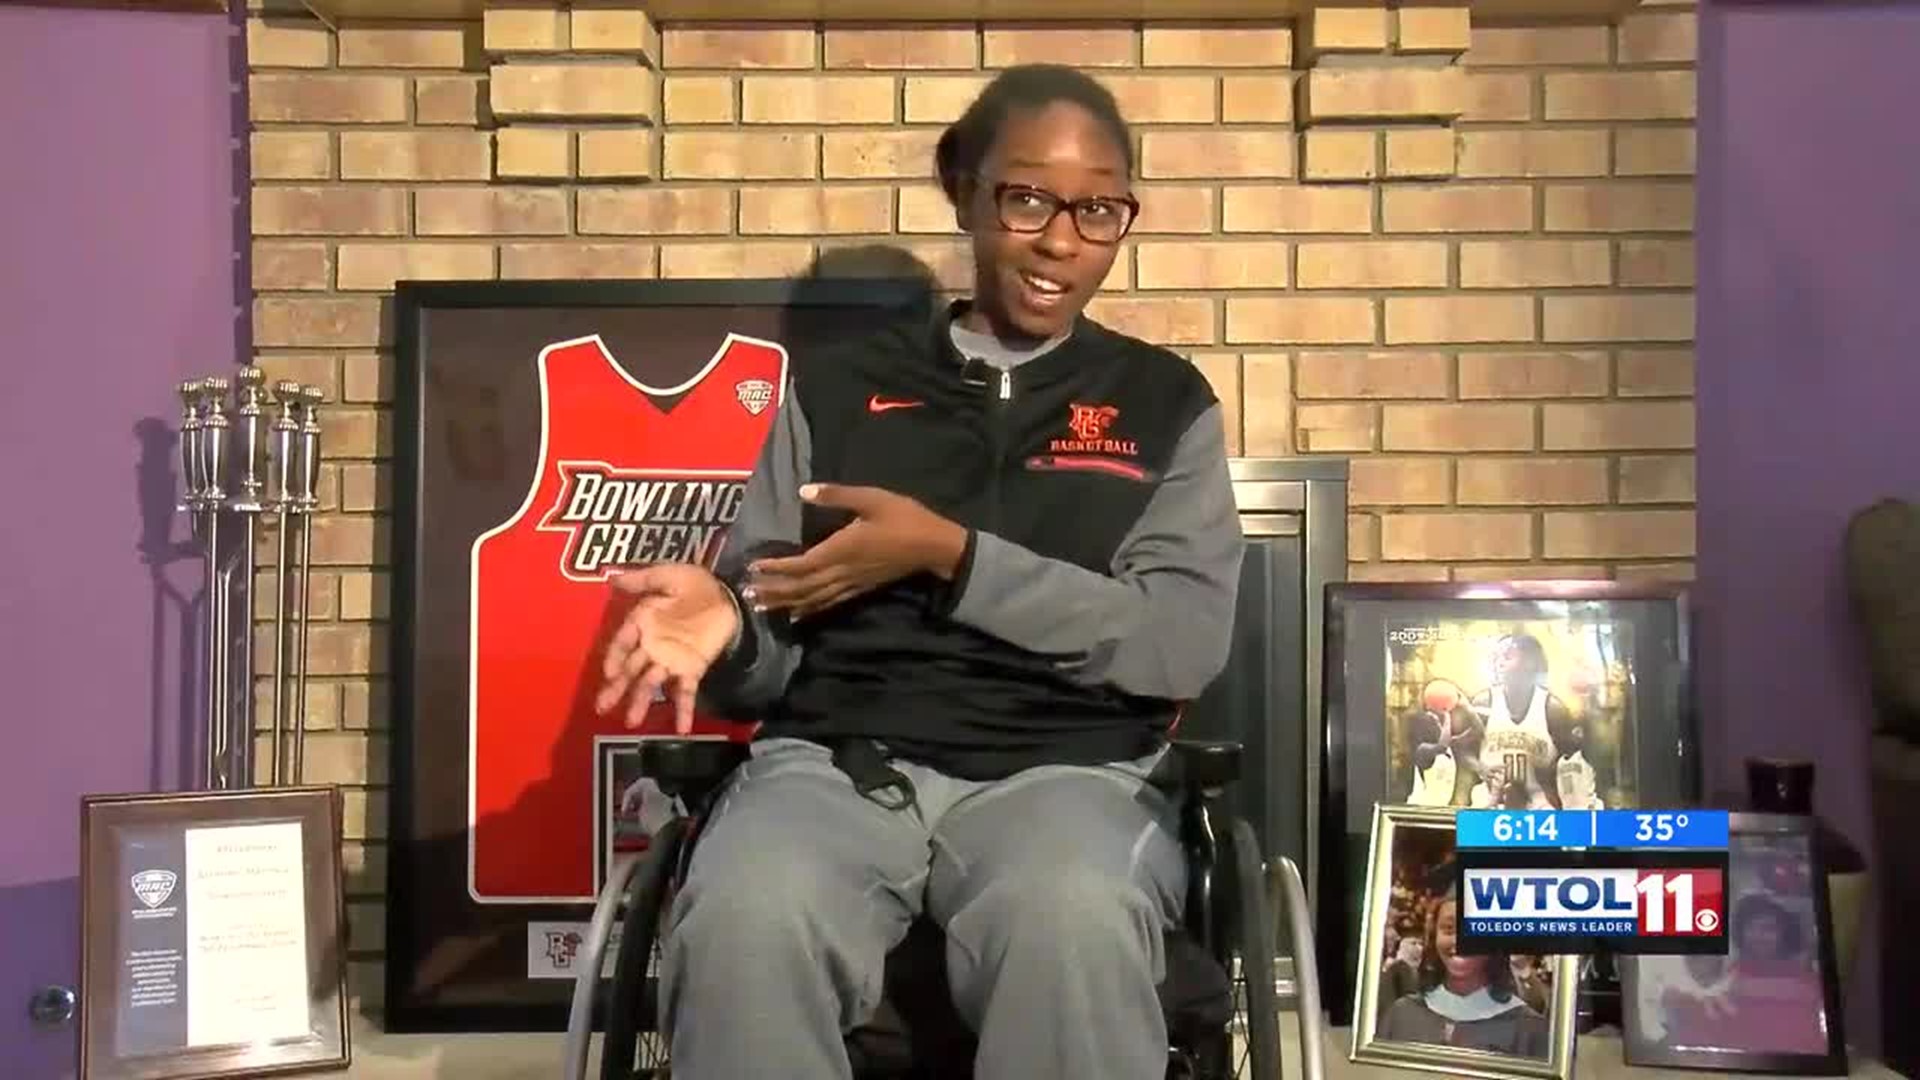 Community donates thousands to former BGSU basketball player with MS